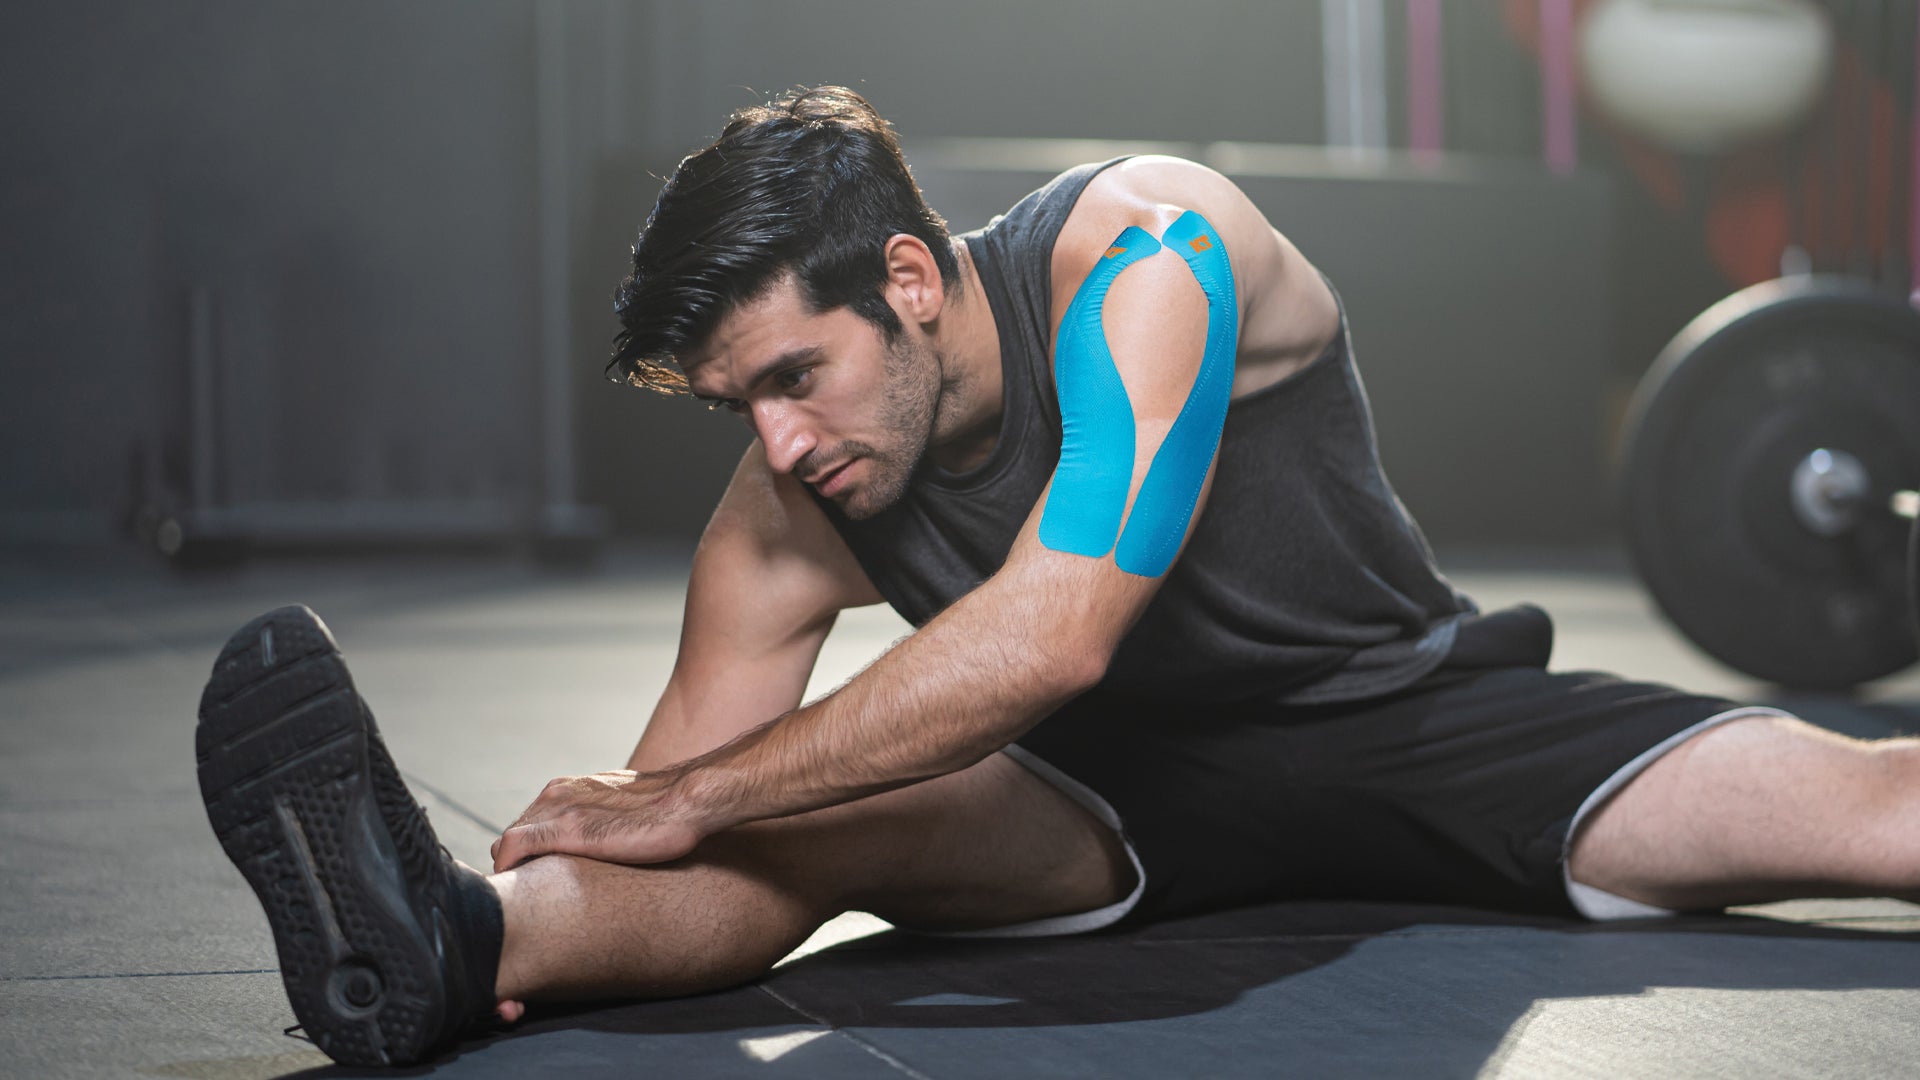 Man in gym stretching before workout